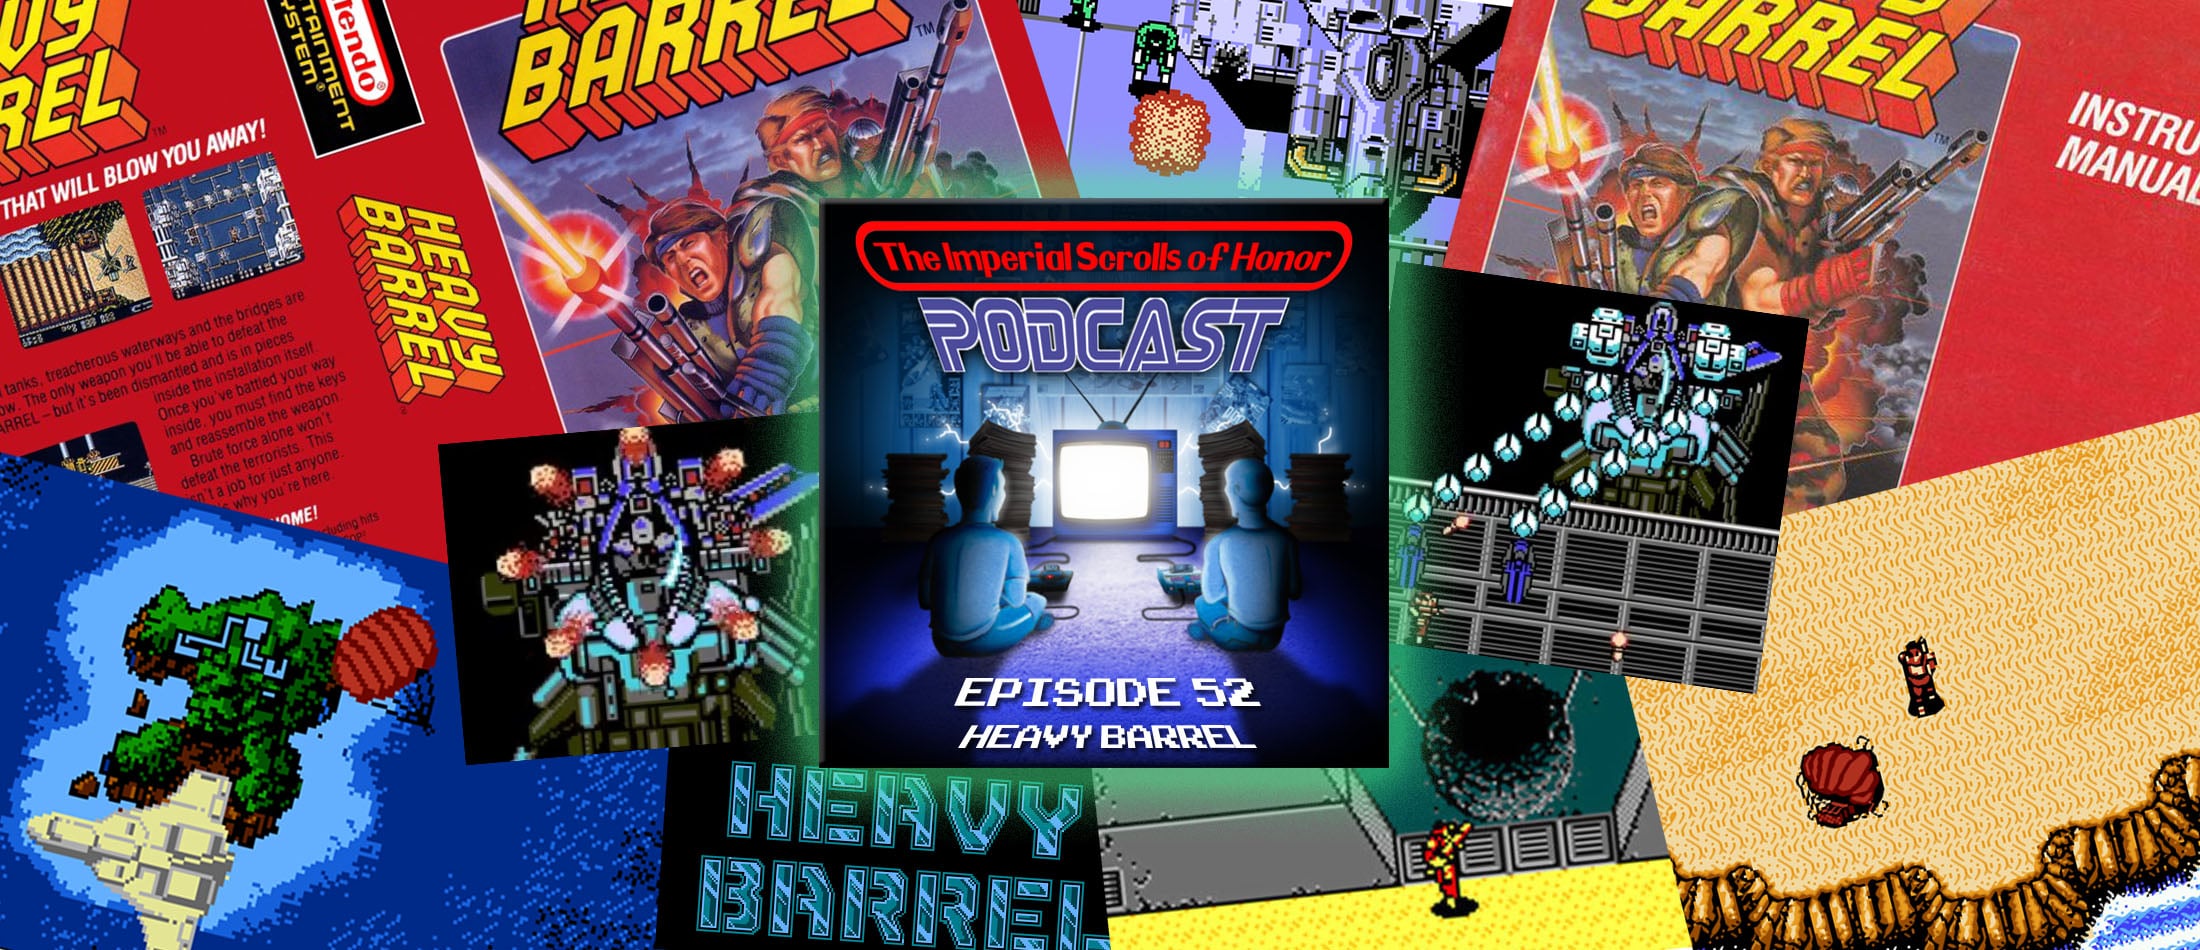 The Imperial Scrolls of Honor Podcast - Ep 52 - Heavy Barrel (NES)